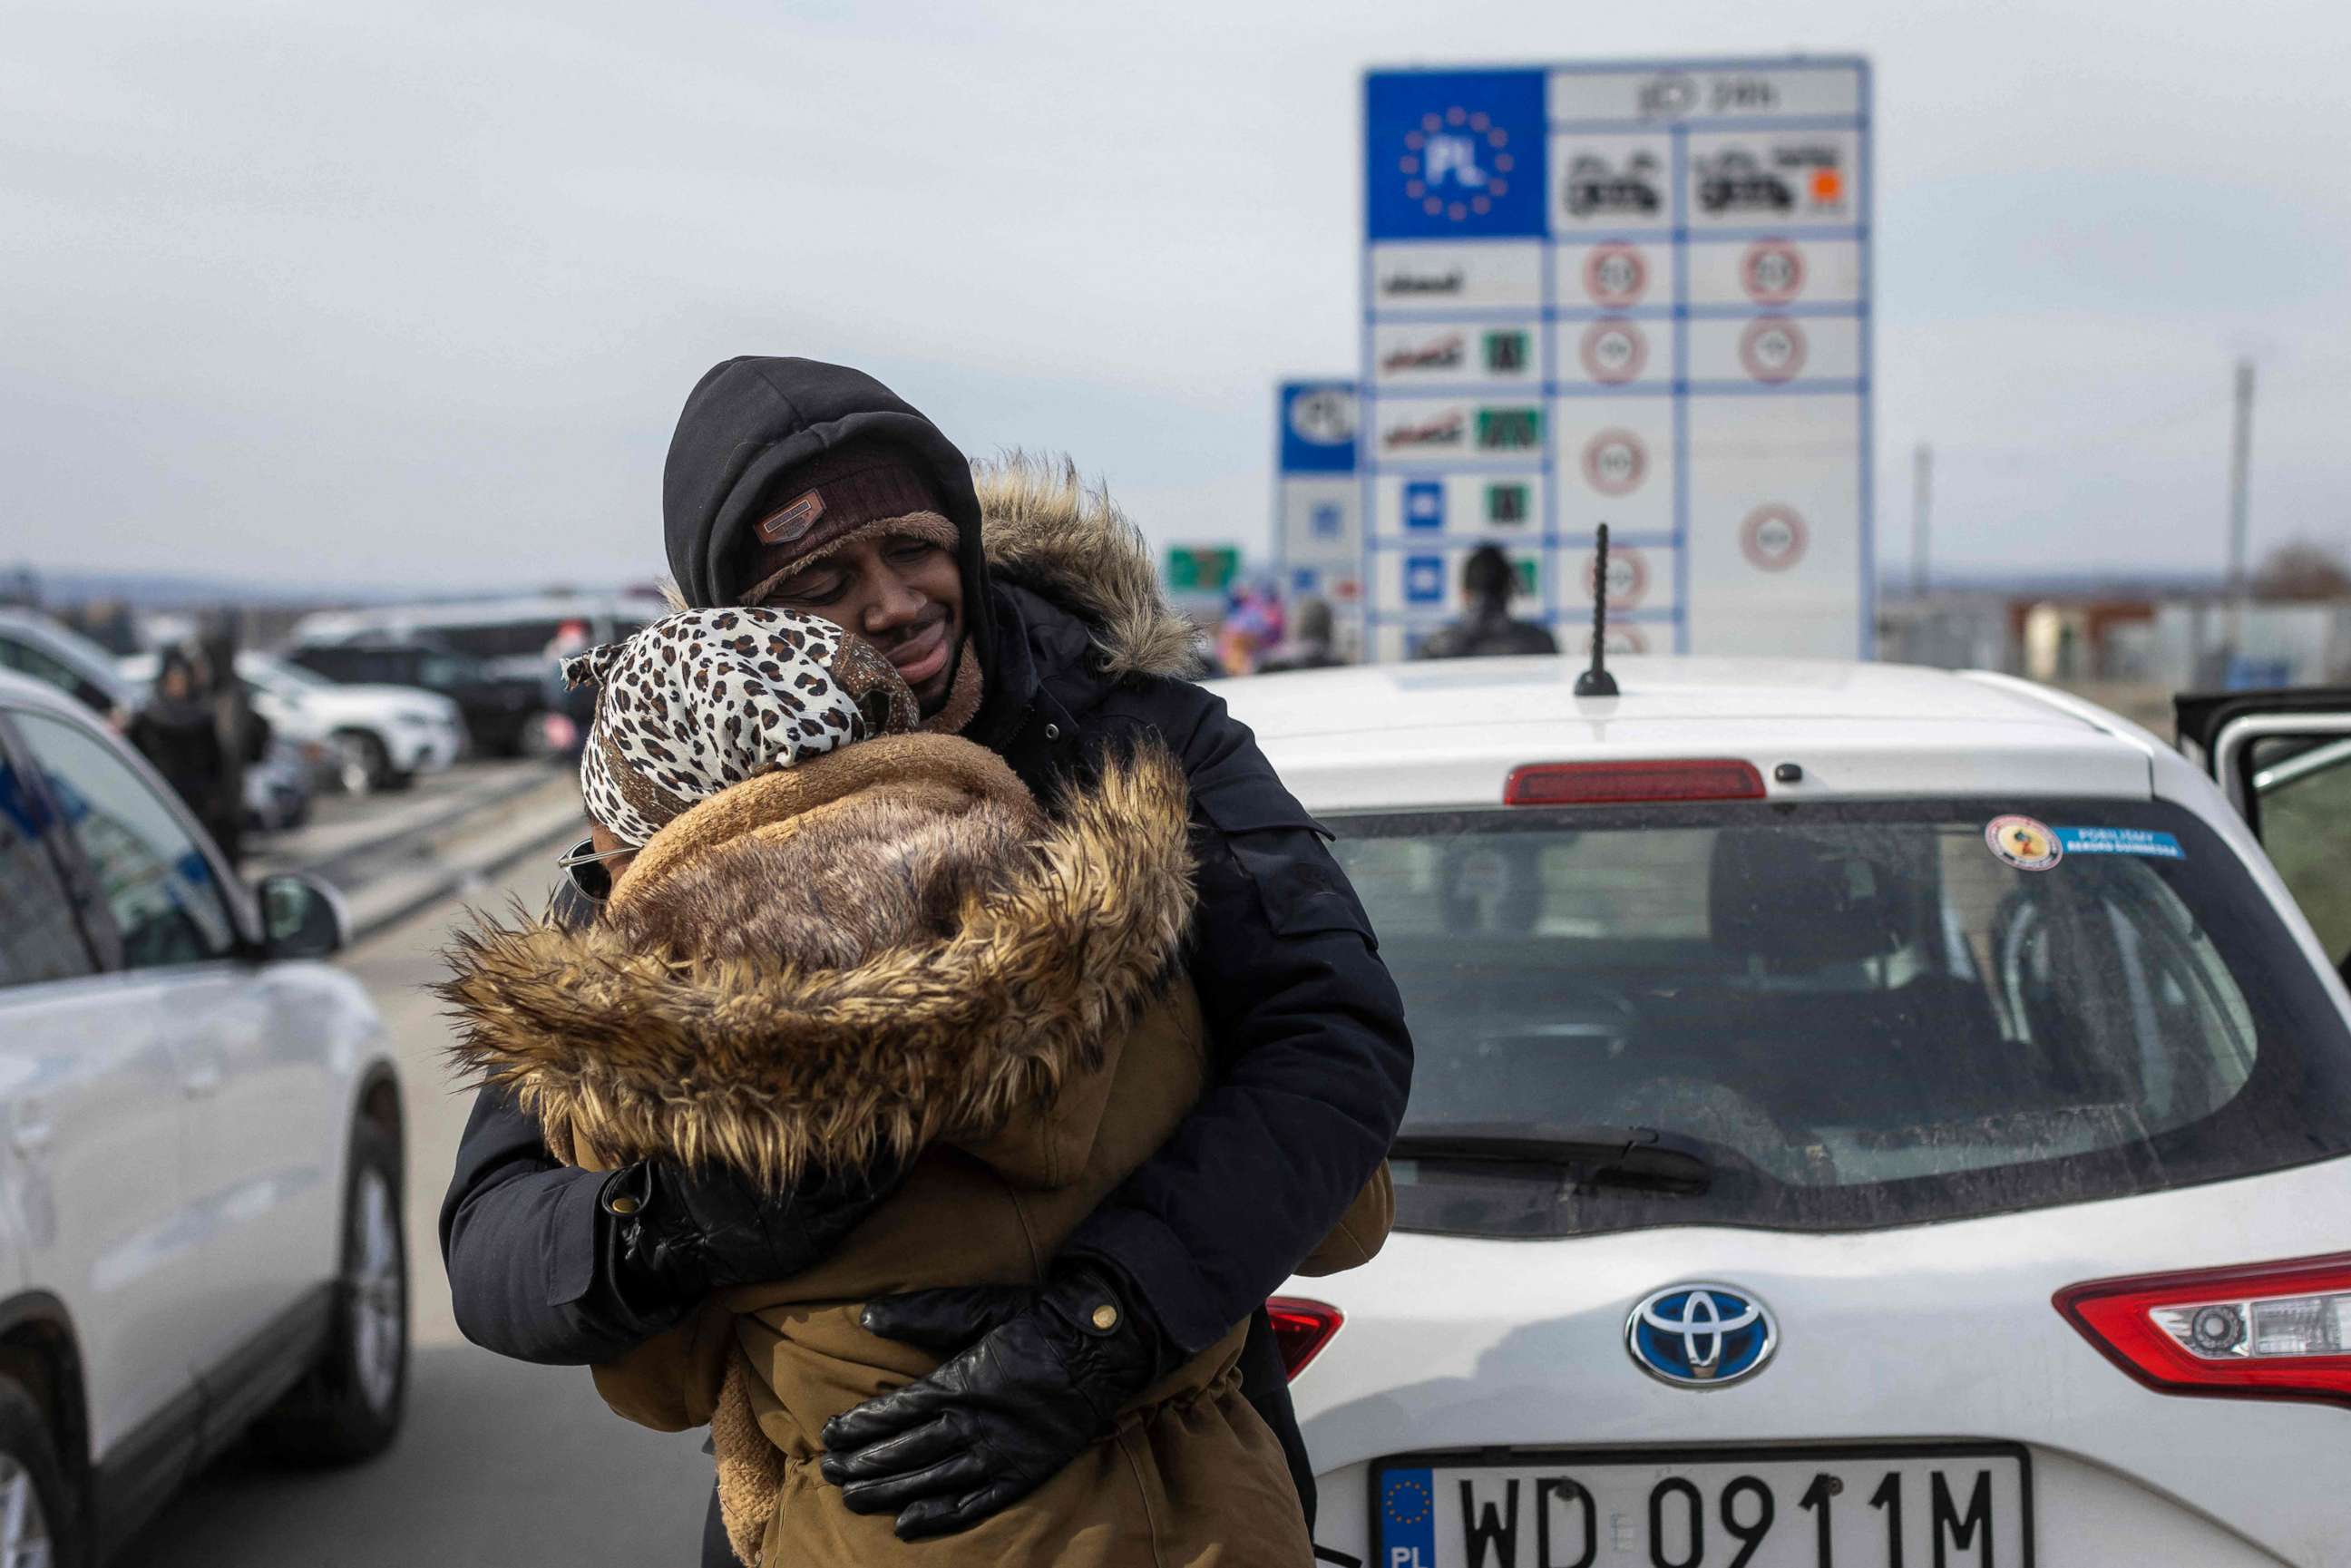 PHOTO: Refugees arriving from Ukraine embrace at the border crossing in Medyka, eastern Poland on March 1, 2022.